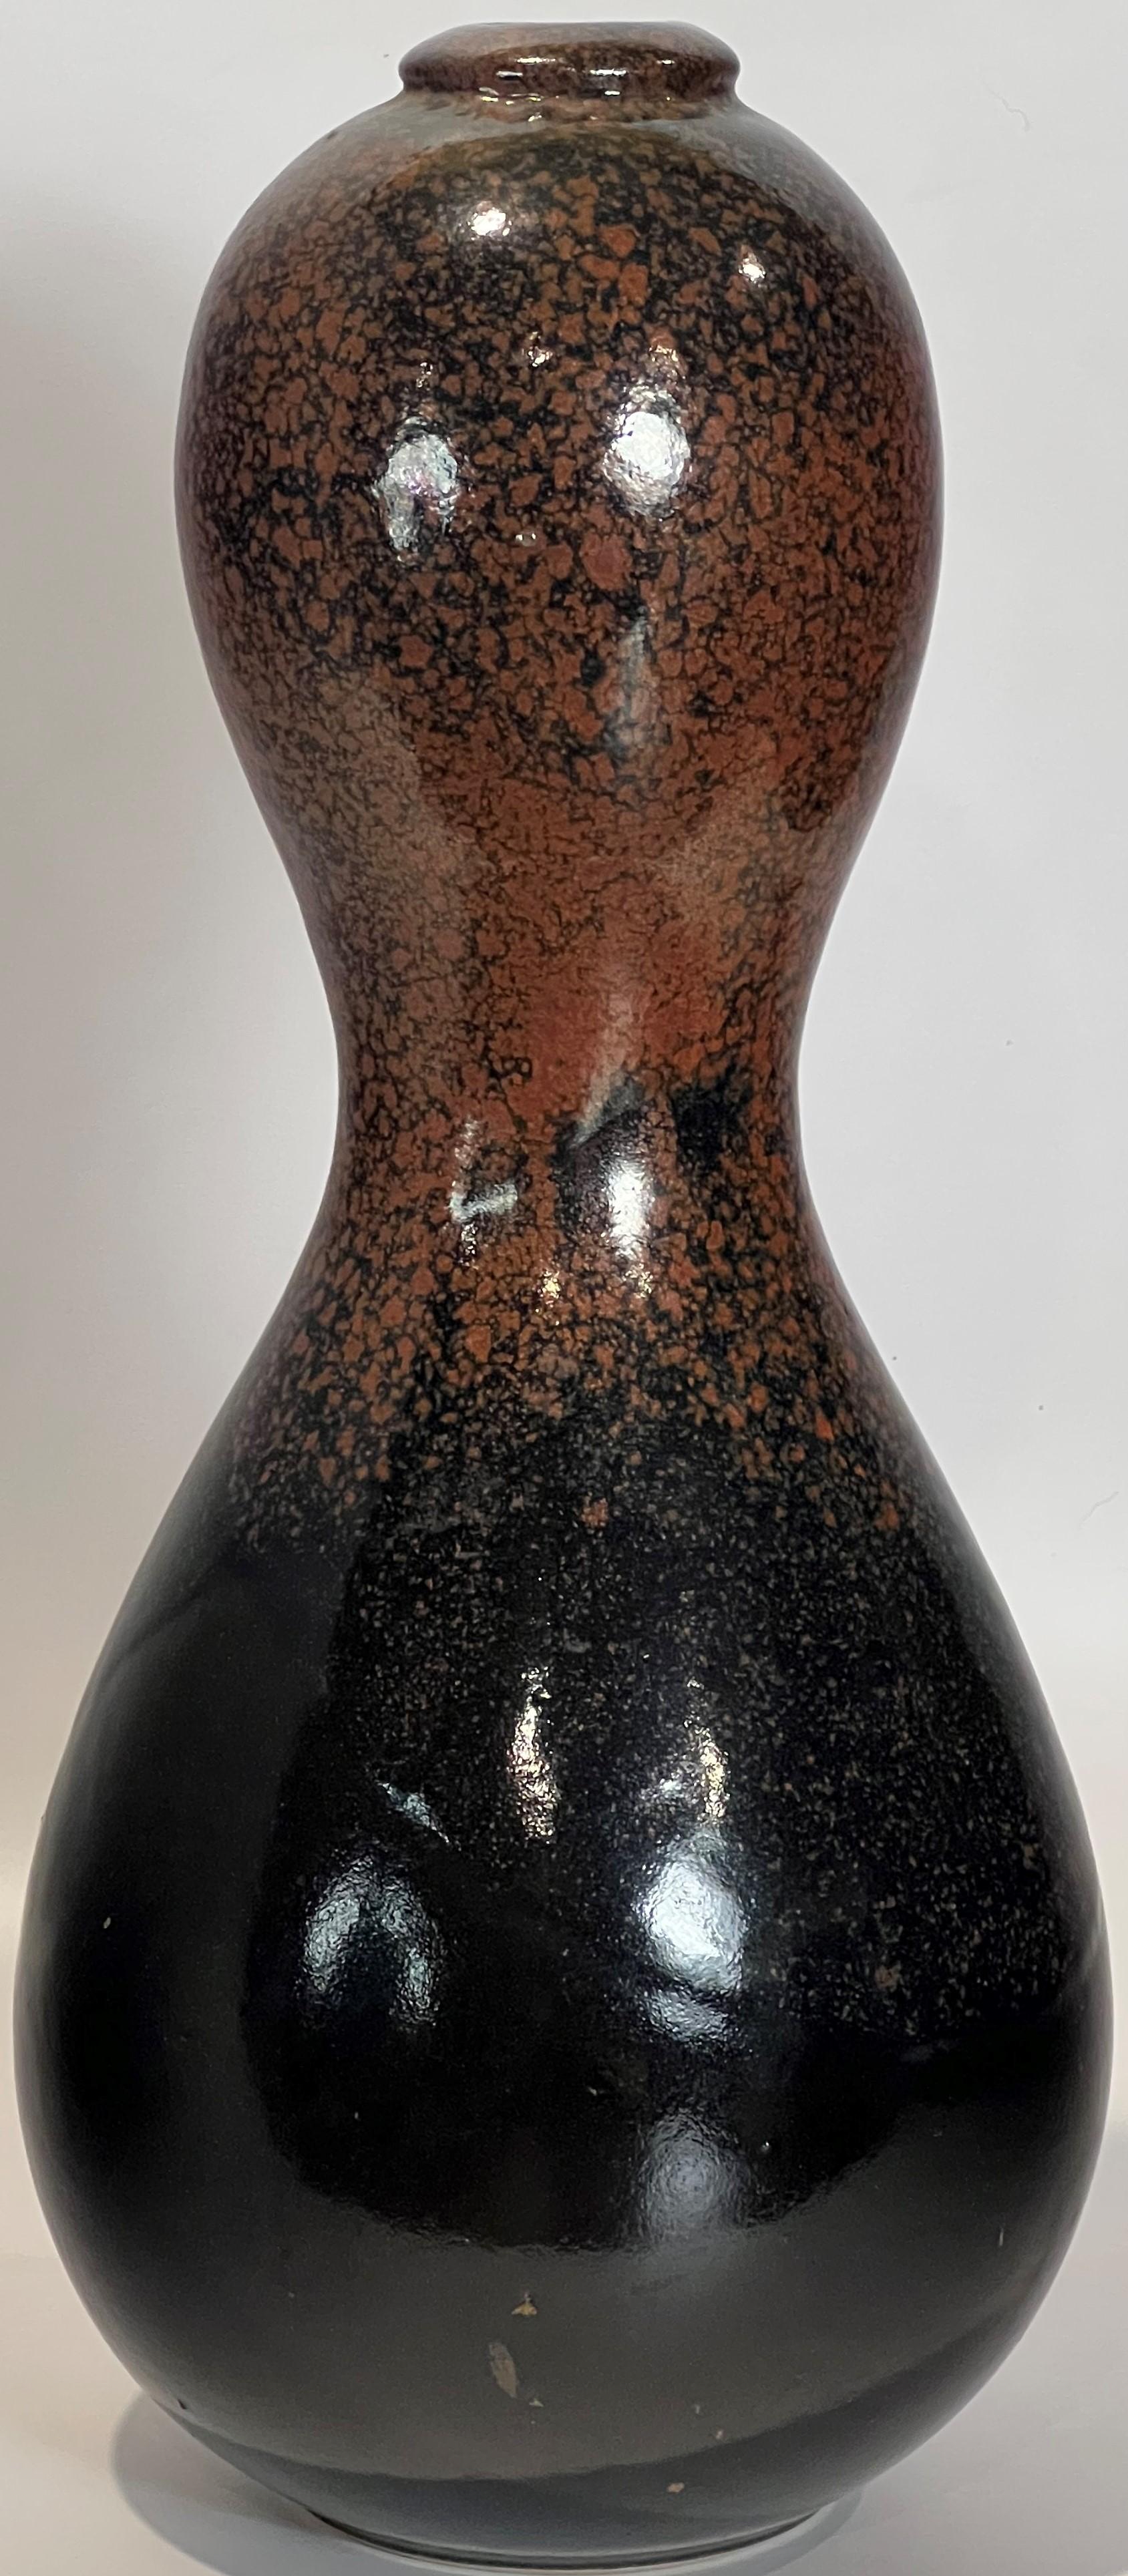 Horst Kerstan double gourd vase. After a period in the 70's focused on experiments with his Anagami kiln, high fired glazes on porcelaneous stoneware embody a third (or fourth) distinct body of work all subtly informed by serious study of Asian